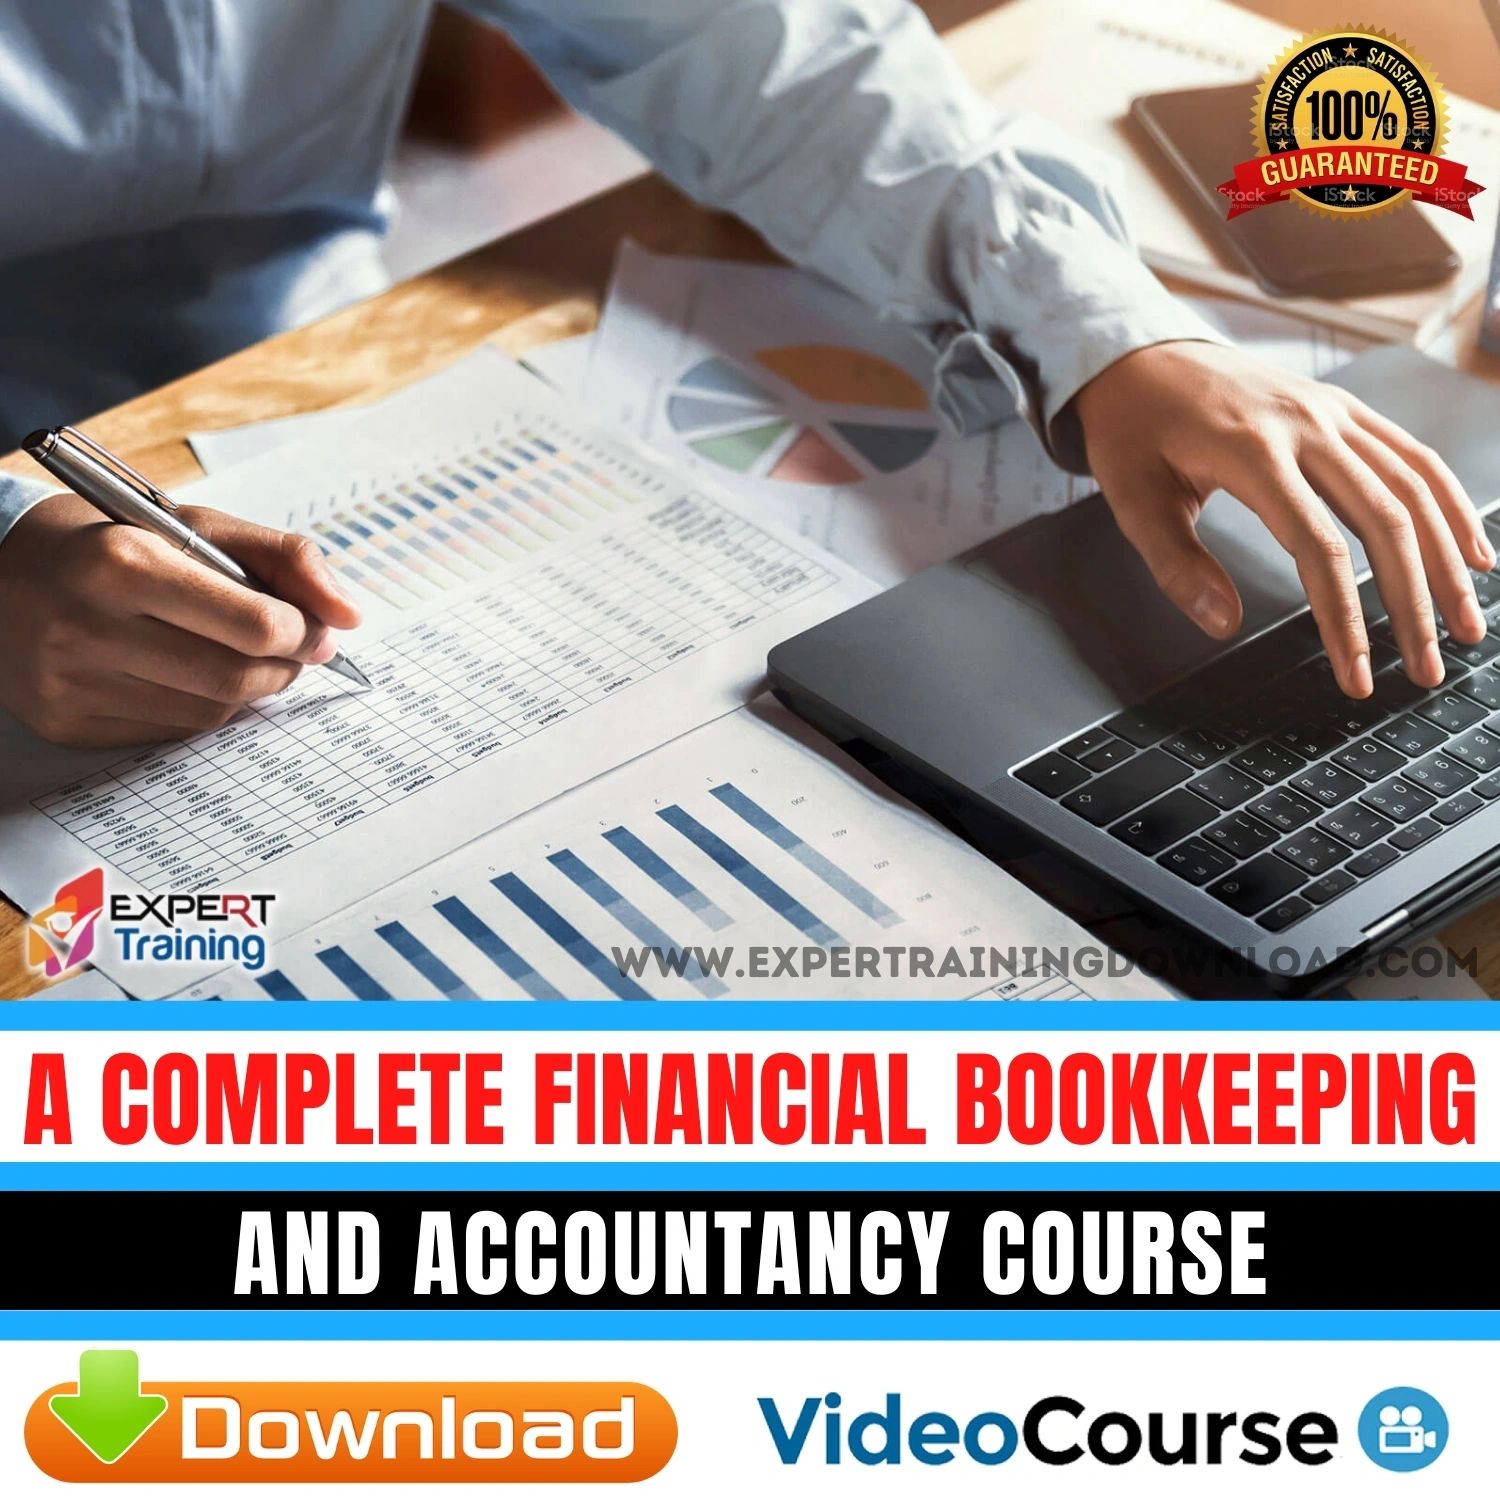 A Complete Financial Bookkeeping and Accountancy Course